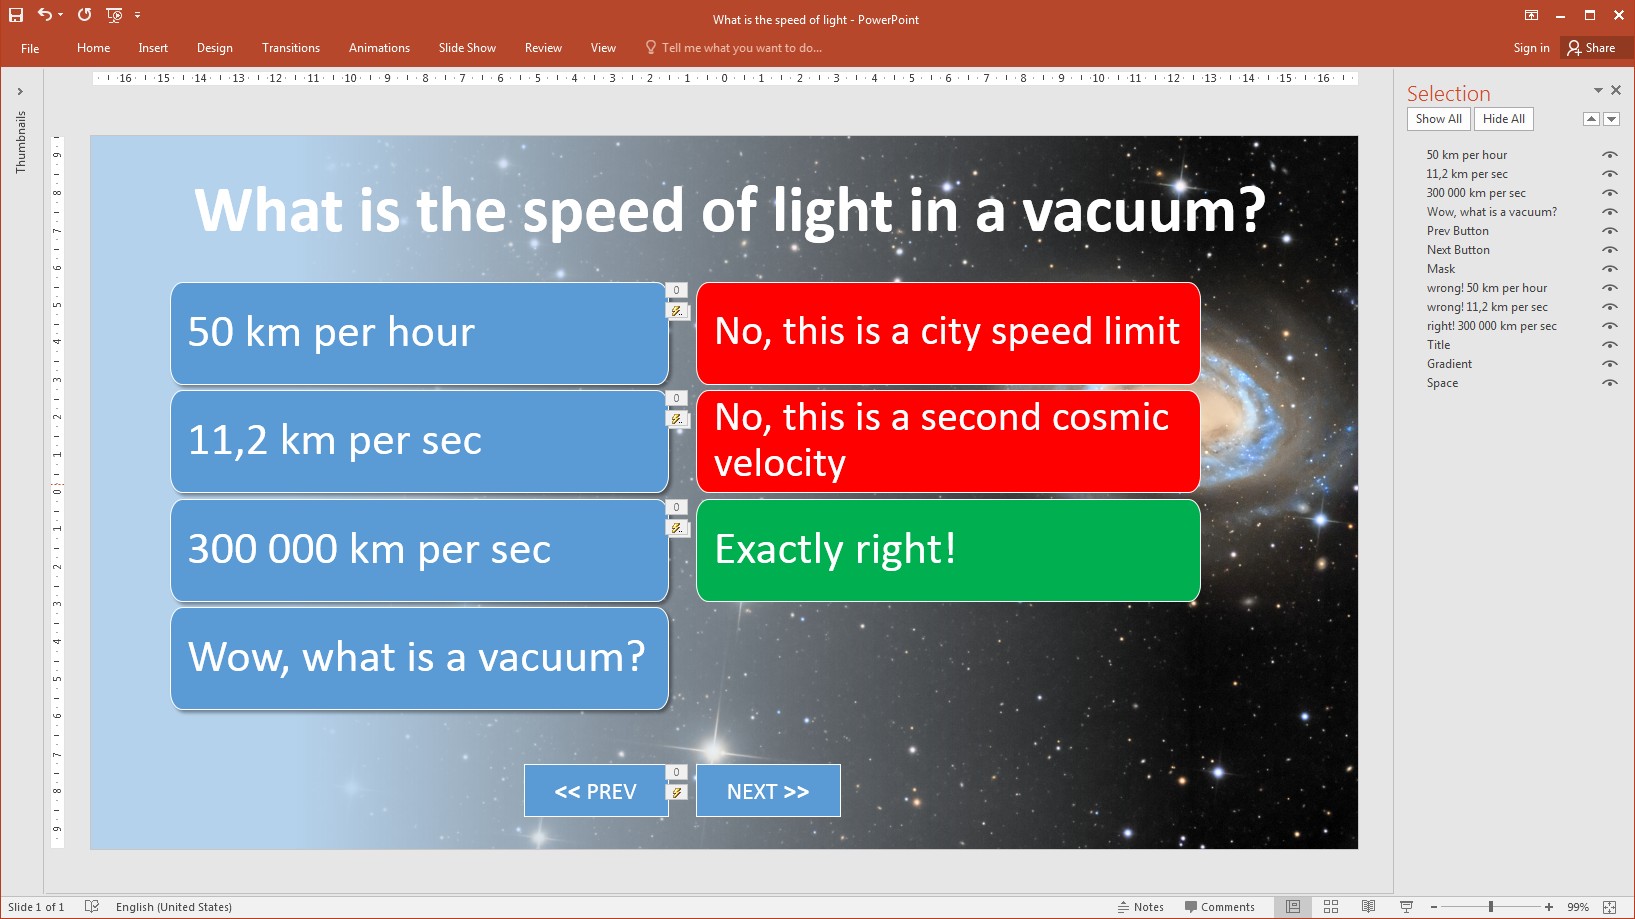 Here's what the interactive presentation slide with PowerPoint triggers looks like